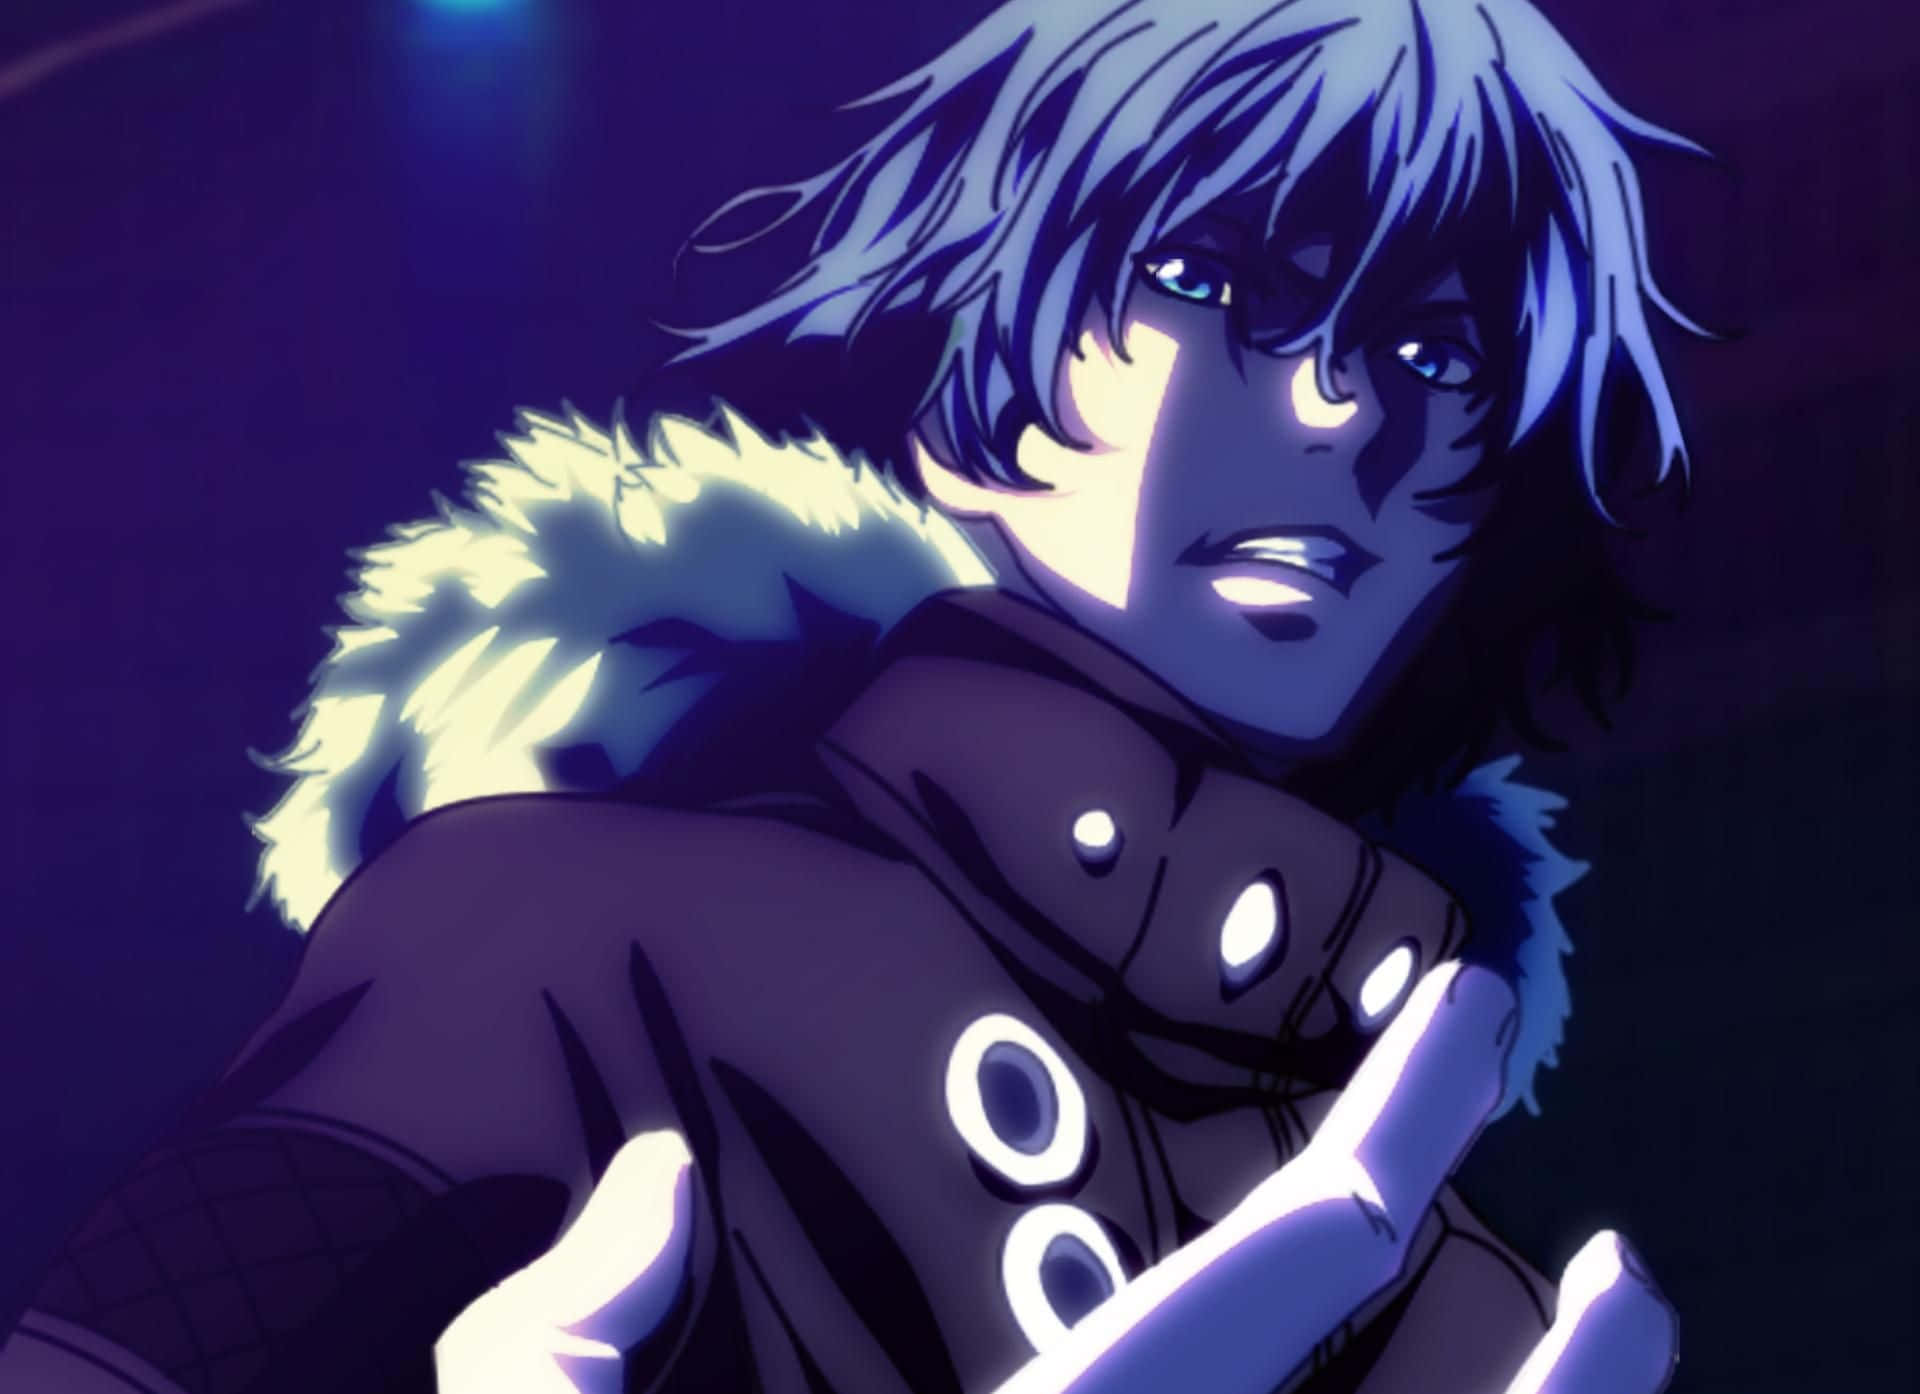 The dark and enigmatic Ayato Kirishima, a powerful ghoul standing tall amidst the chaos. Wallpaper